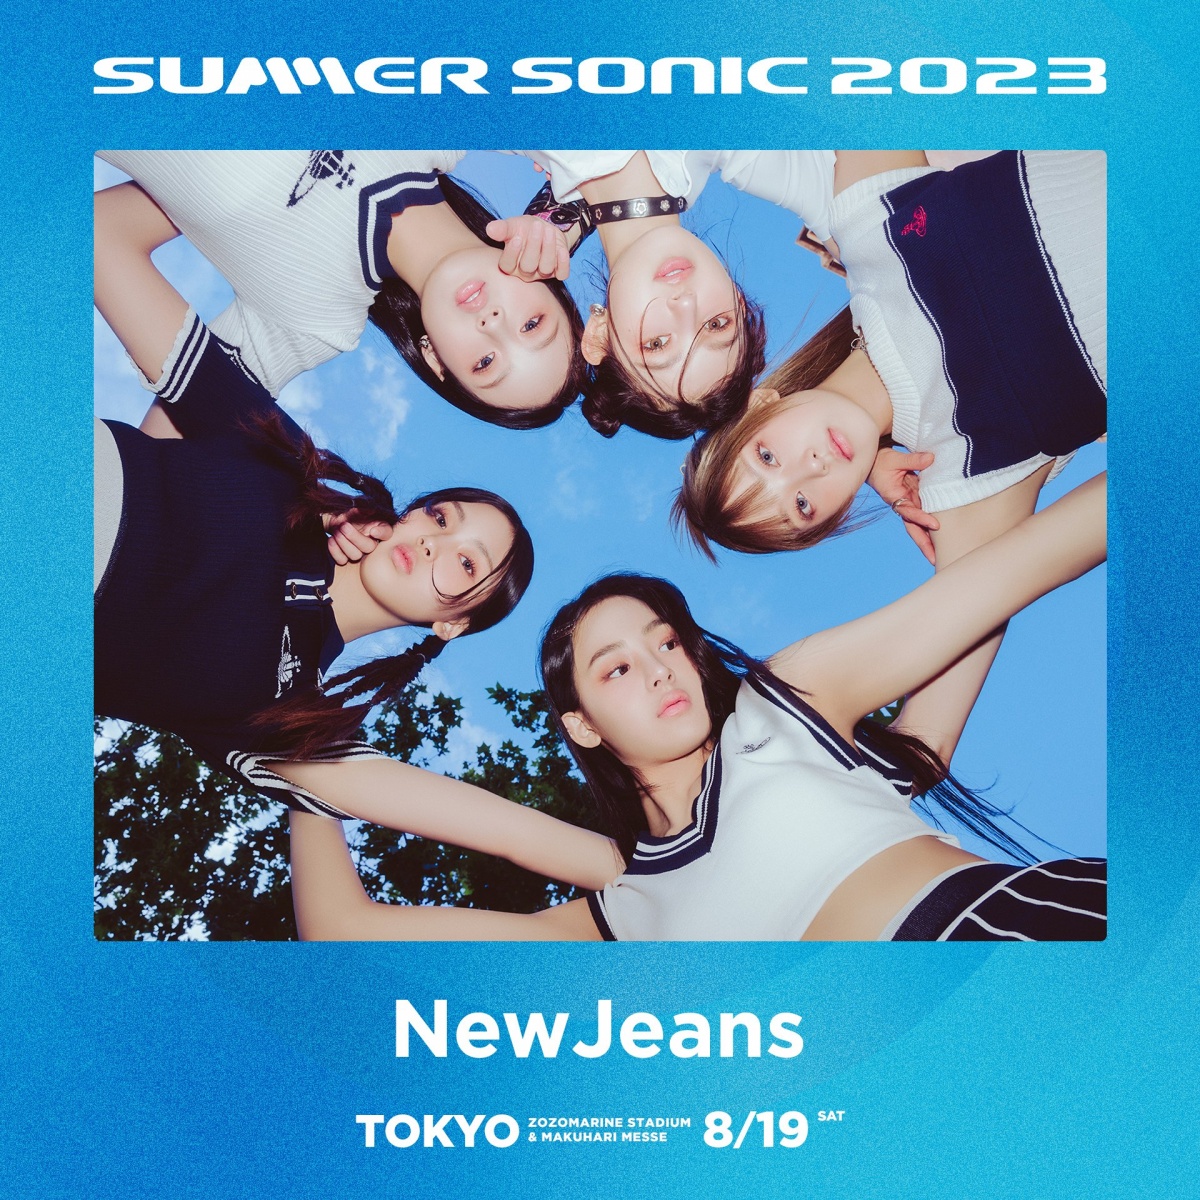 NewJeans, Lollapalooza Chicago, USA, SUMMER SONIC, Japan confirmed to participate… global move